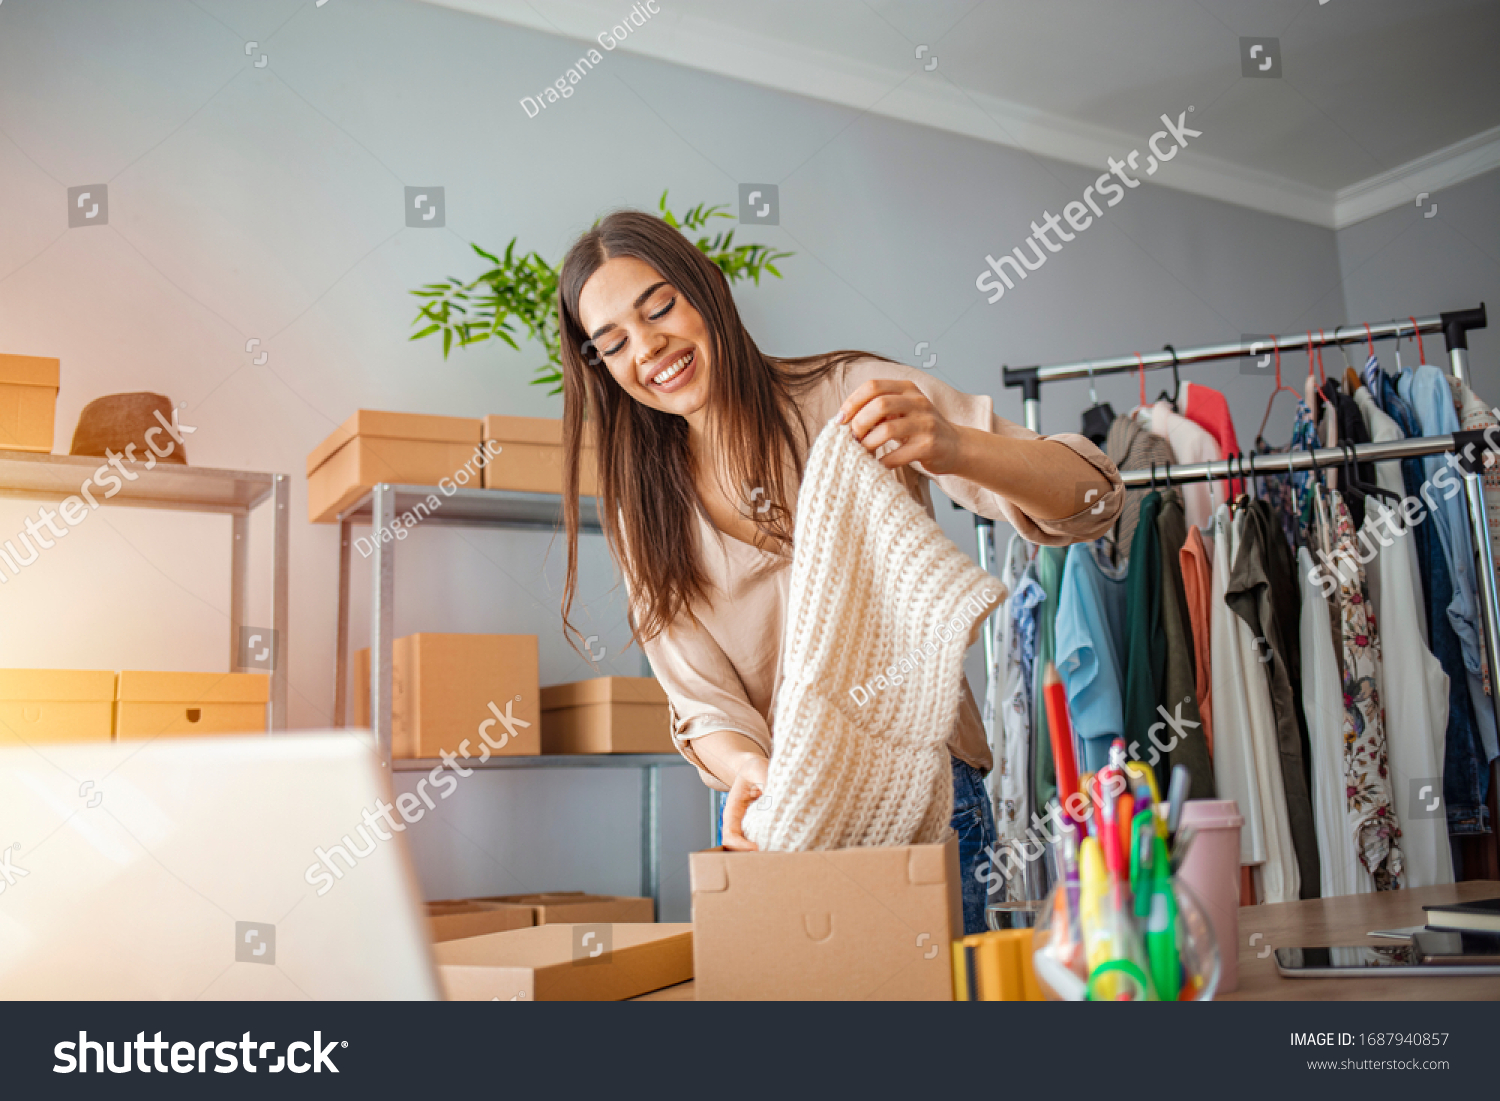 Woman Running Business From Home. Shipping shopping online, young start up small business owner packing cardboard box at workplace. Online selling or e-commerce. #1687940857